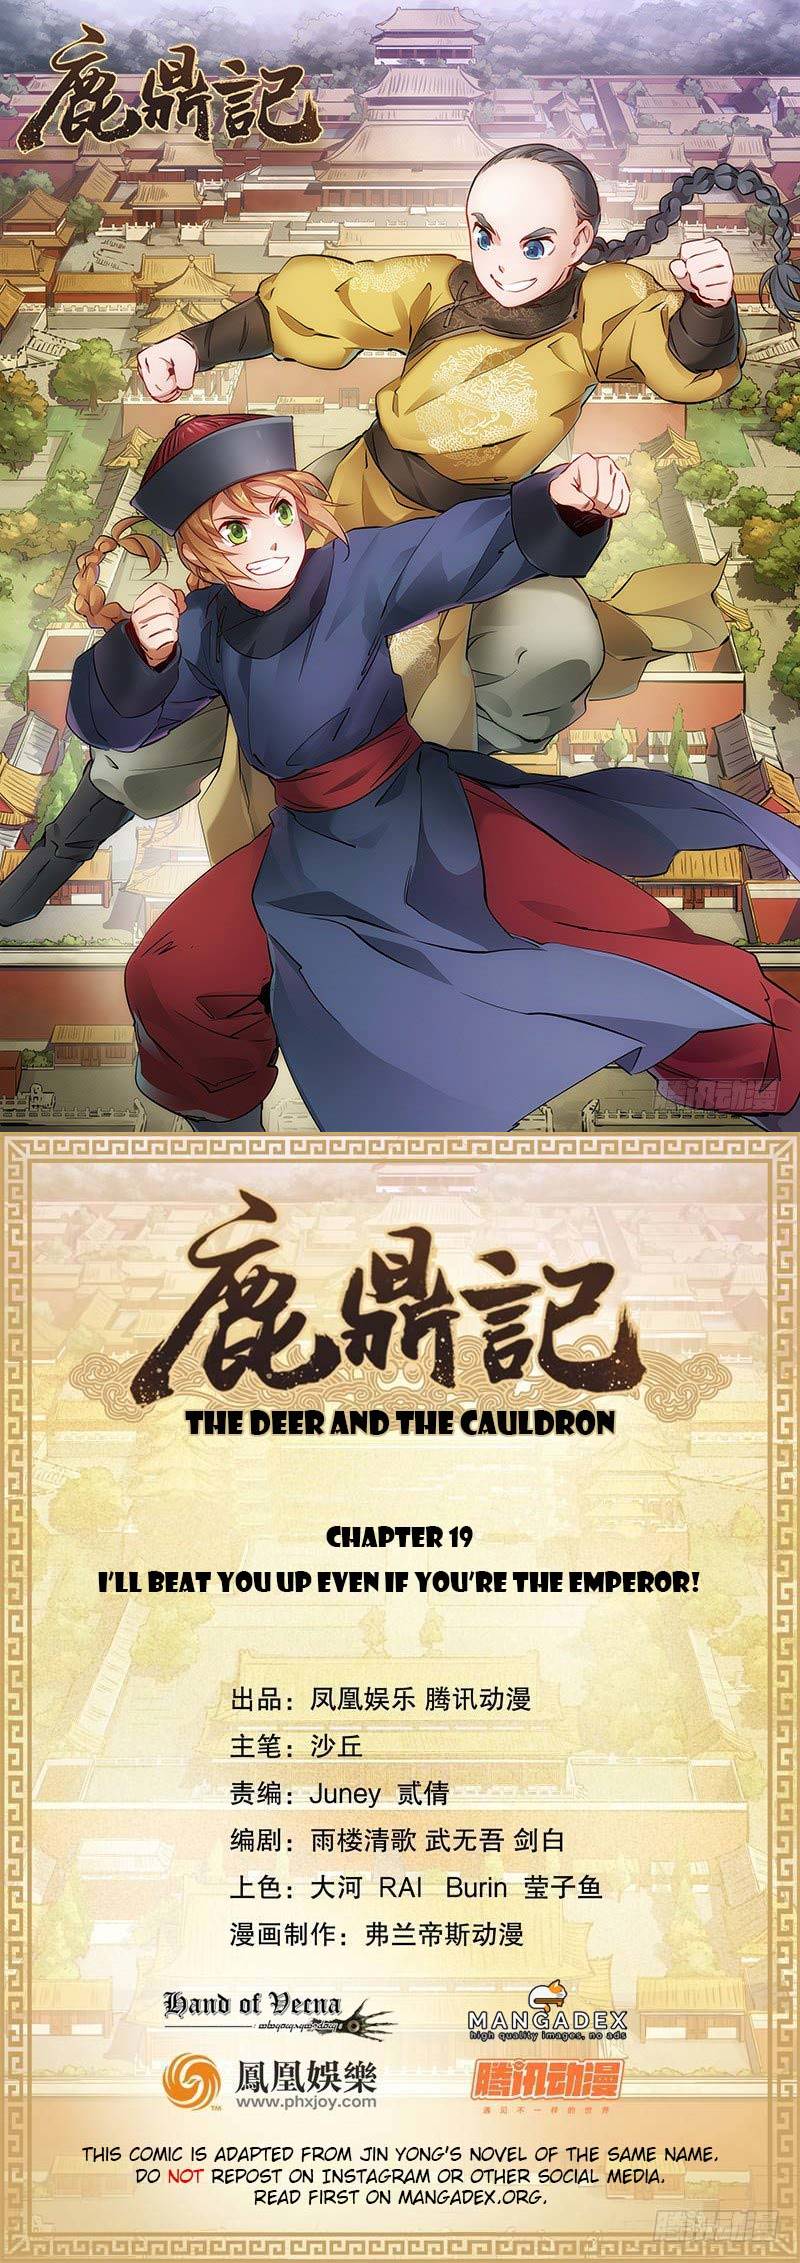 The Deer and the Cauldron Ch. 19 I'll Beat You Up Even If You're The Emperor!